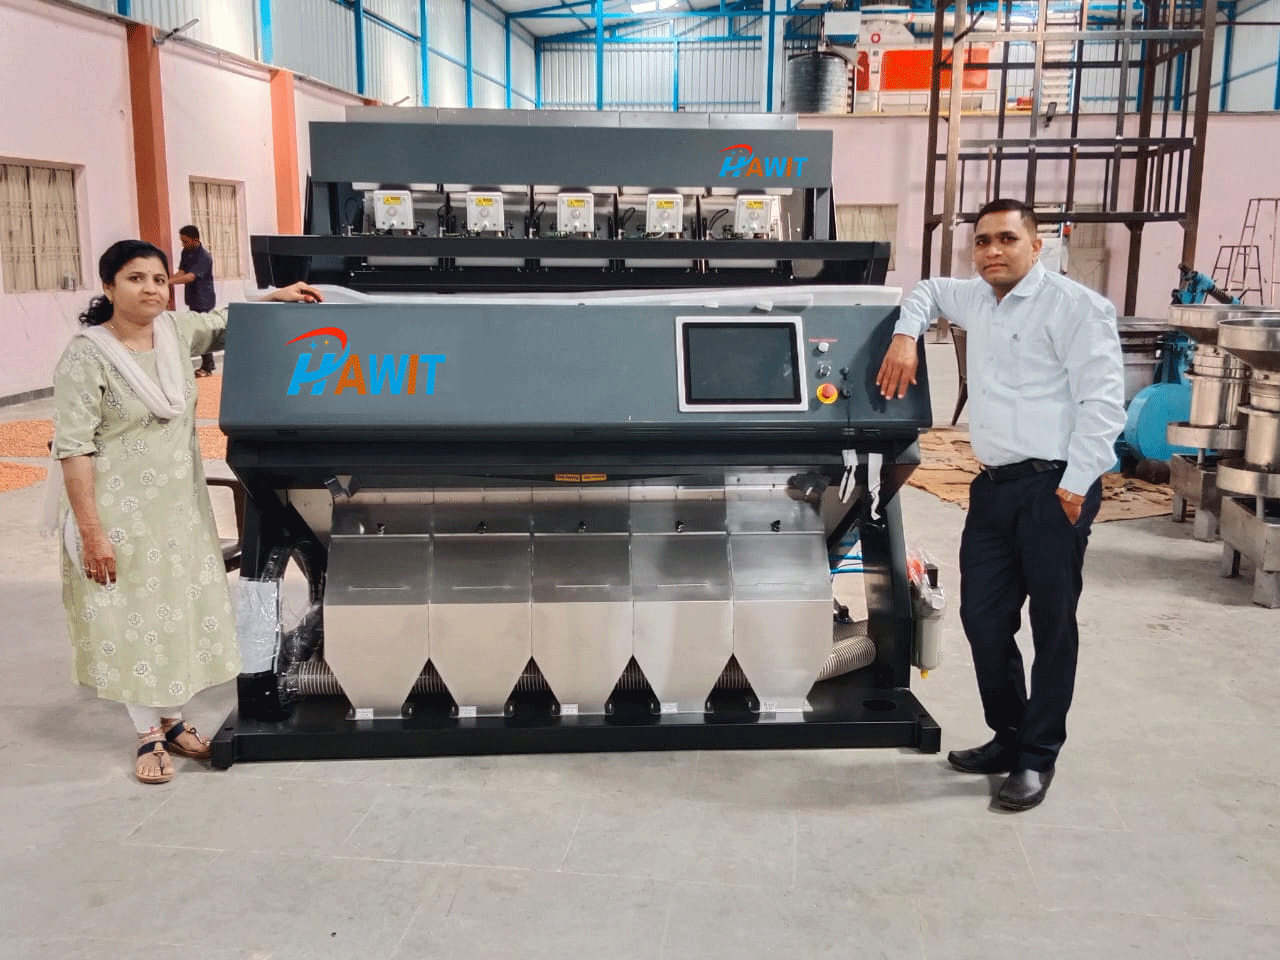 Hawit color sorter is most welcome and popular in South Asia and South America market